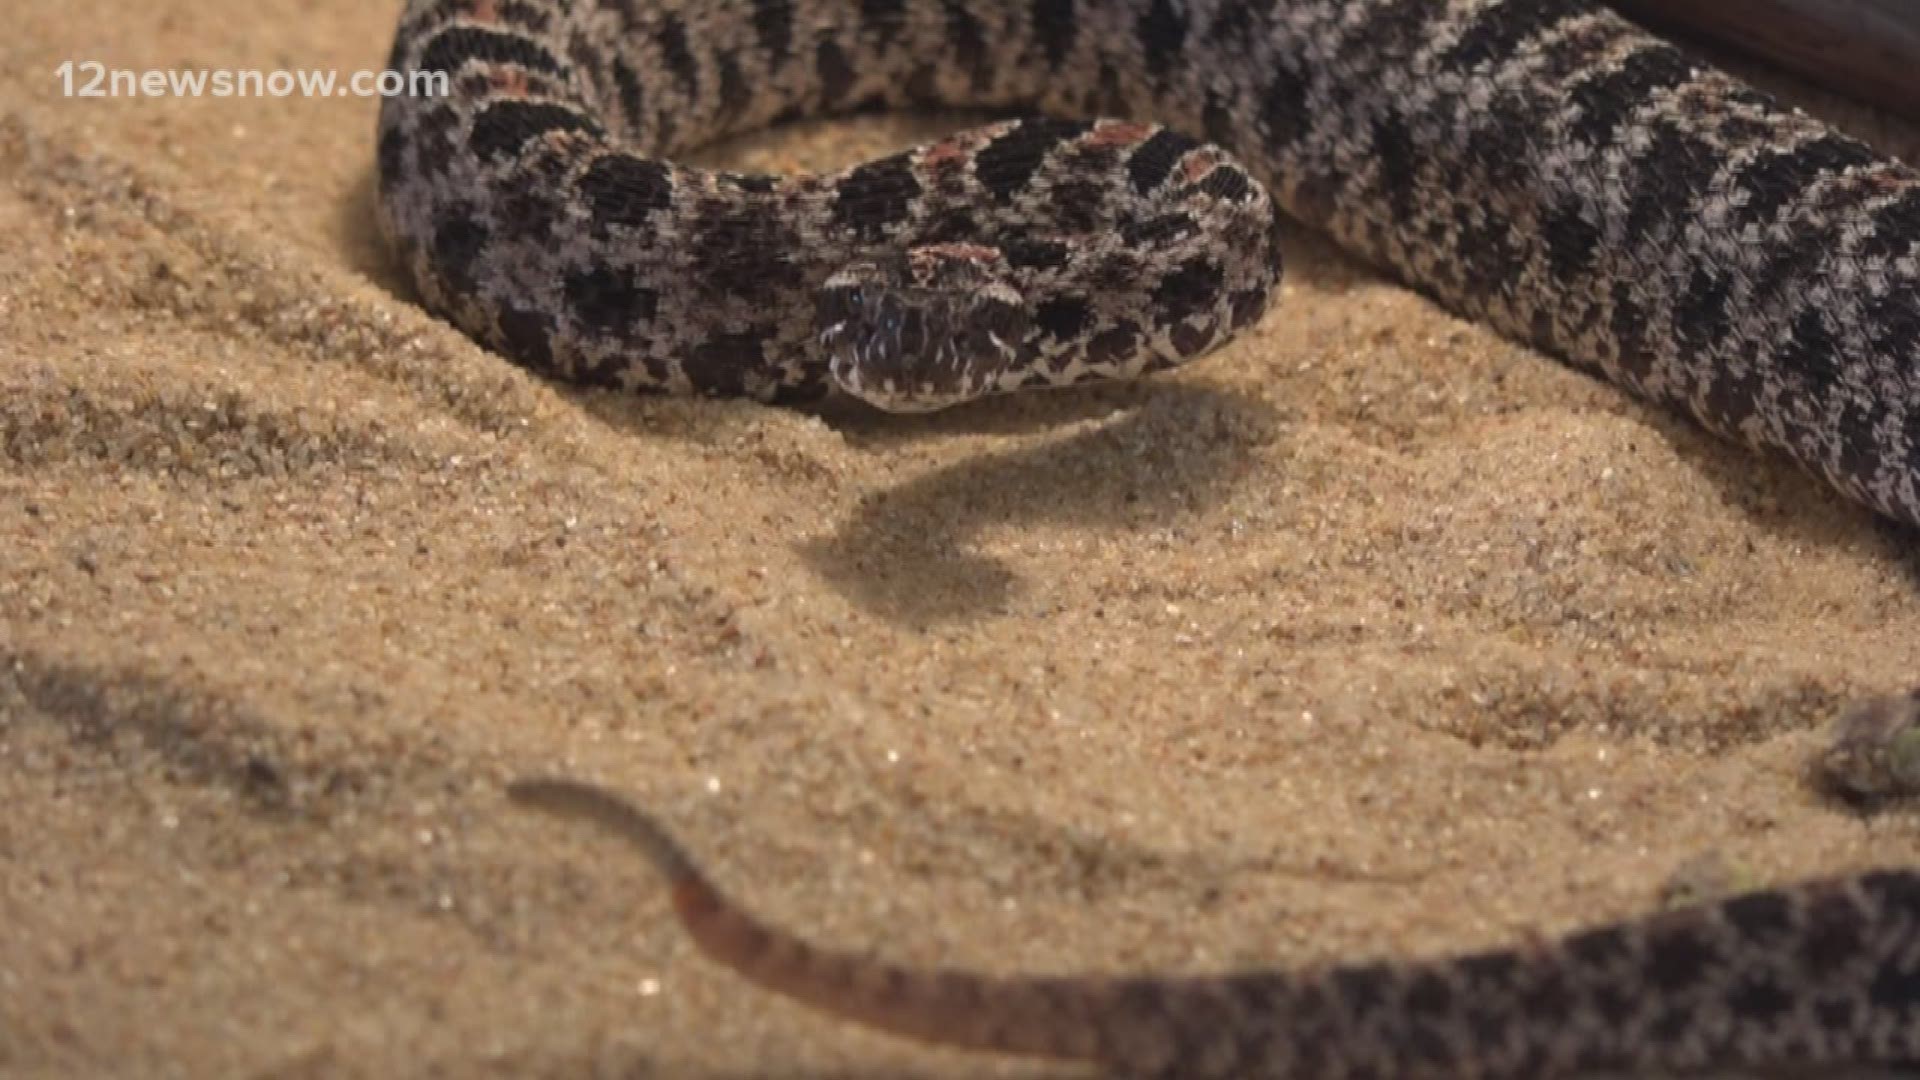 Snakes starting to appear in southeast Texas with warmer weather